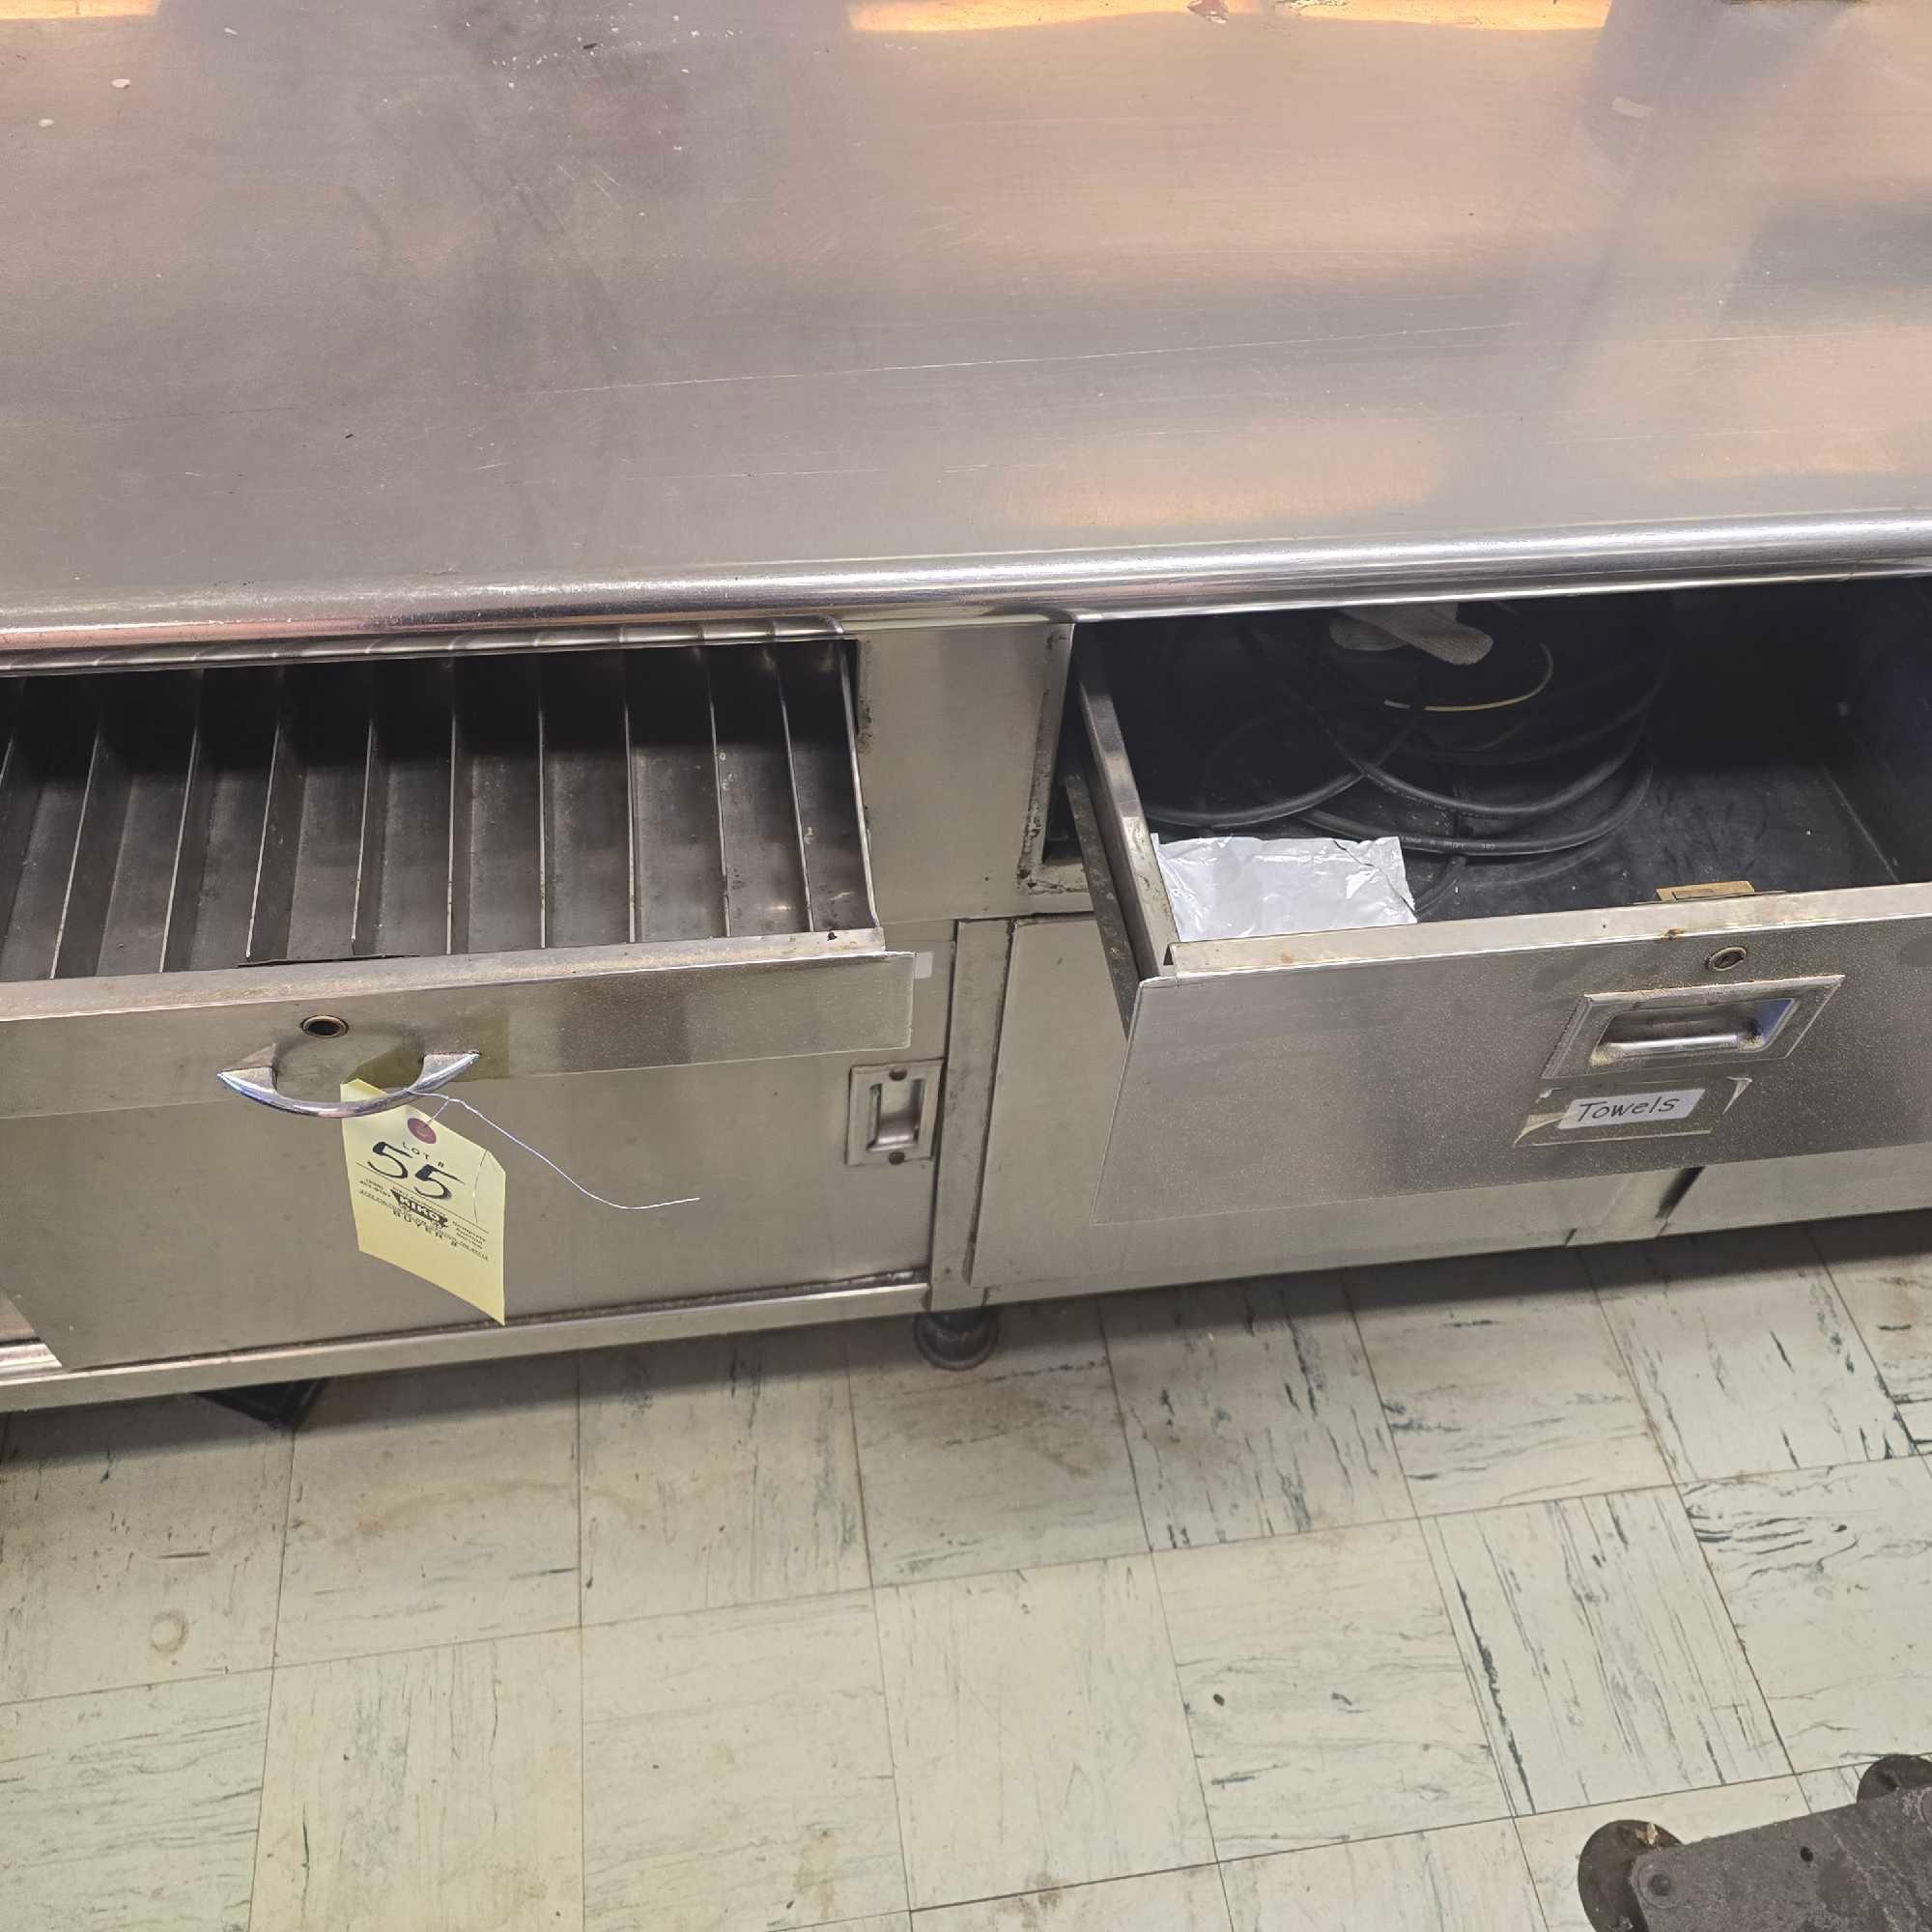 large stainless Steel counter with sink and outlets